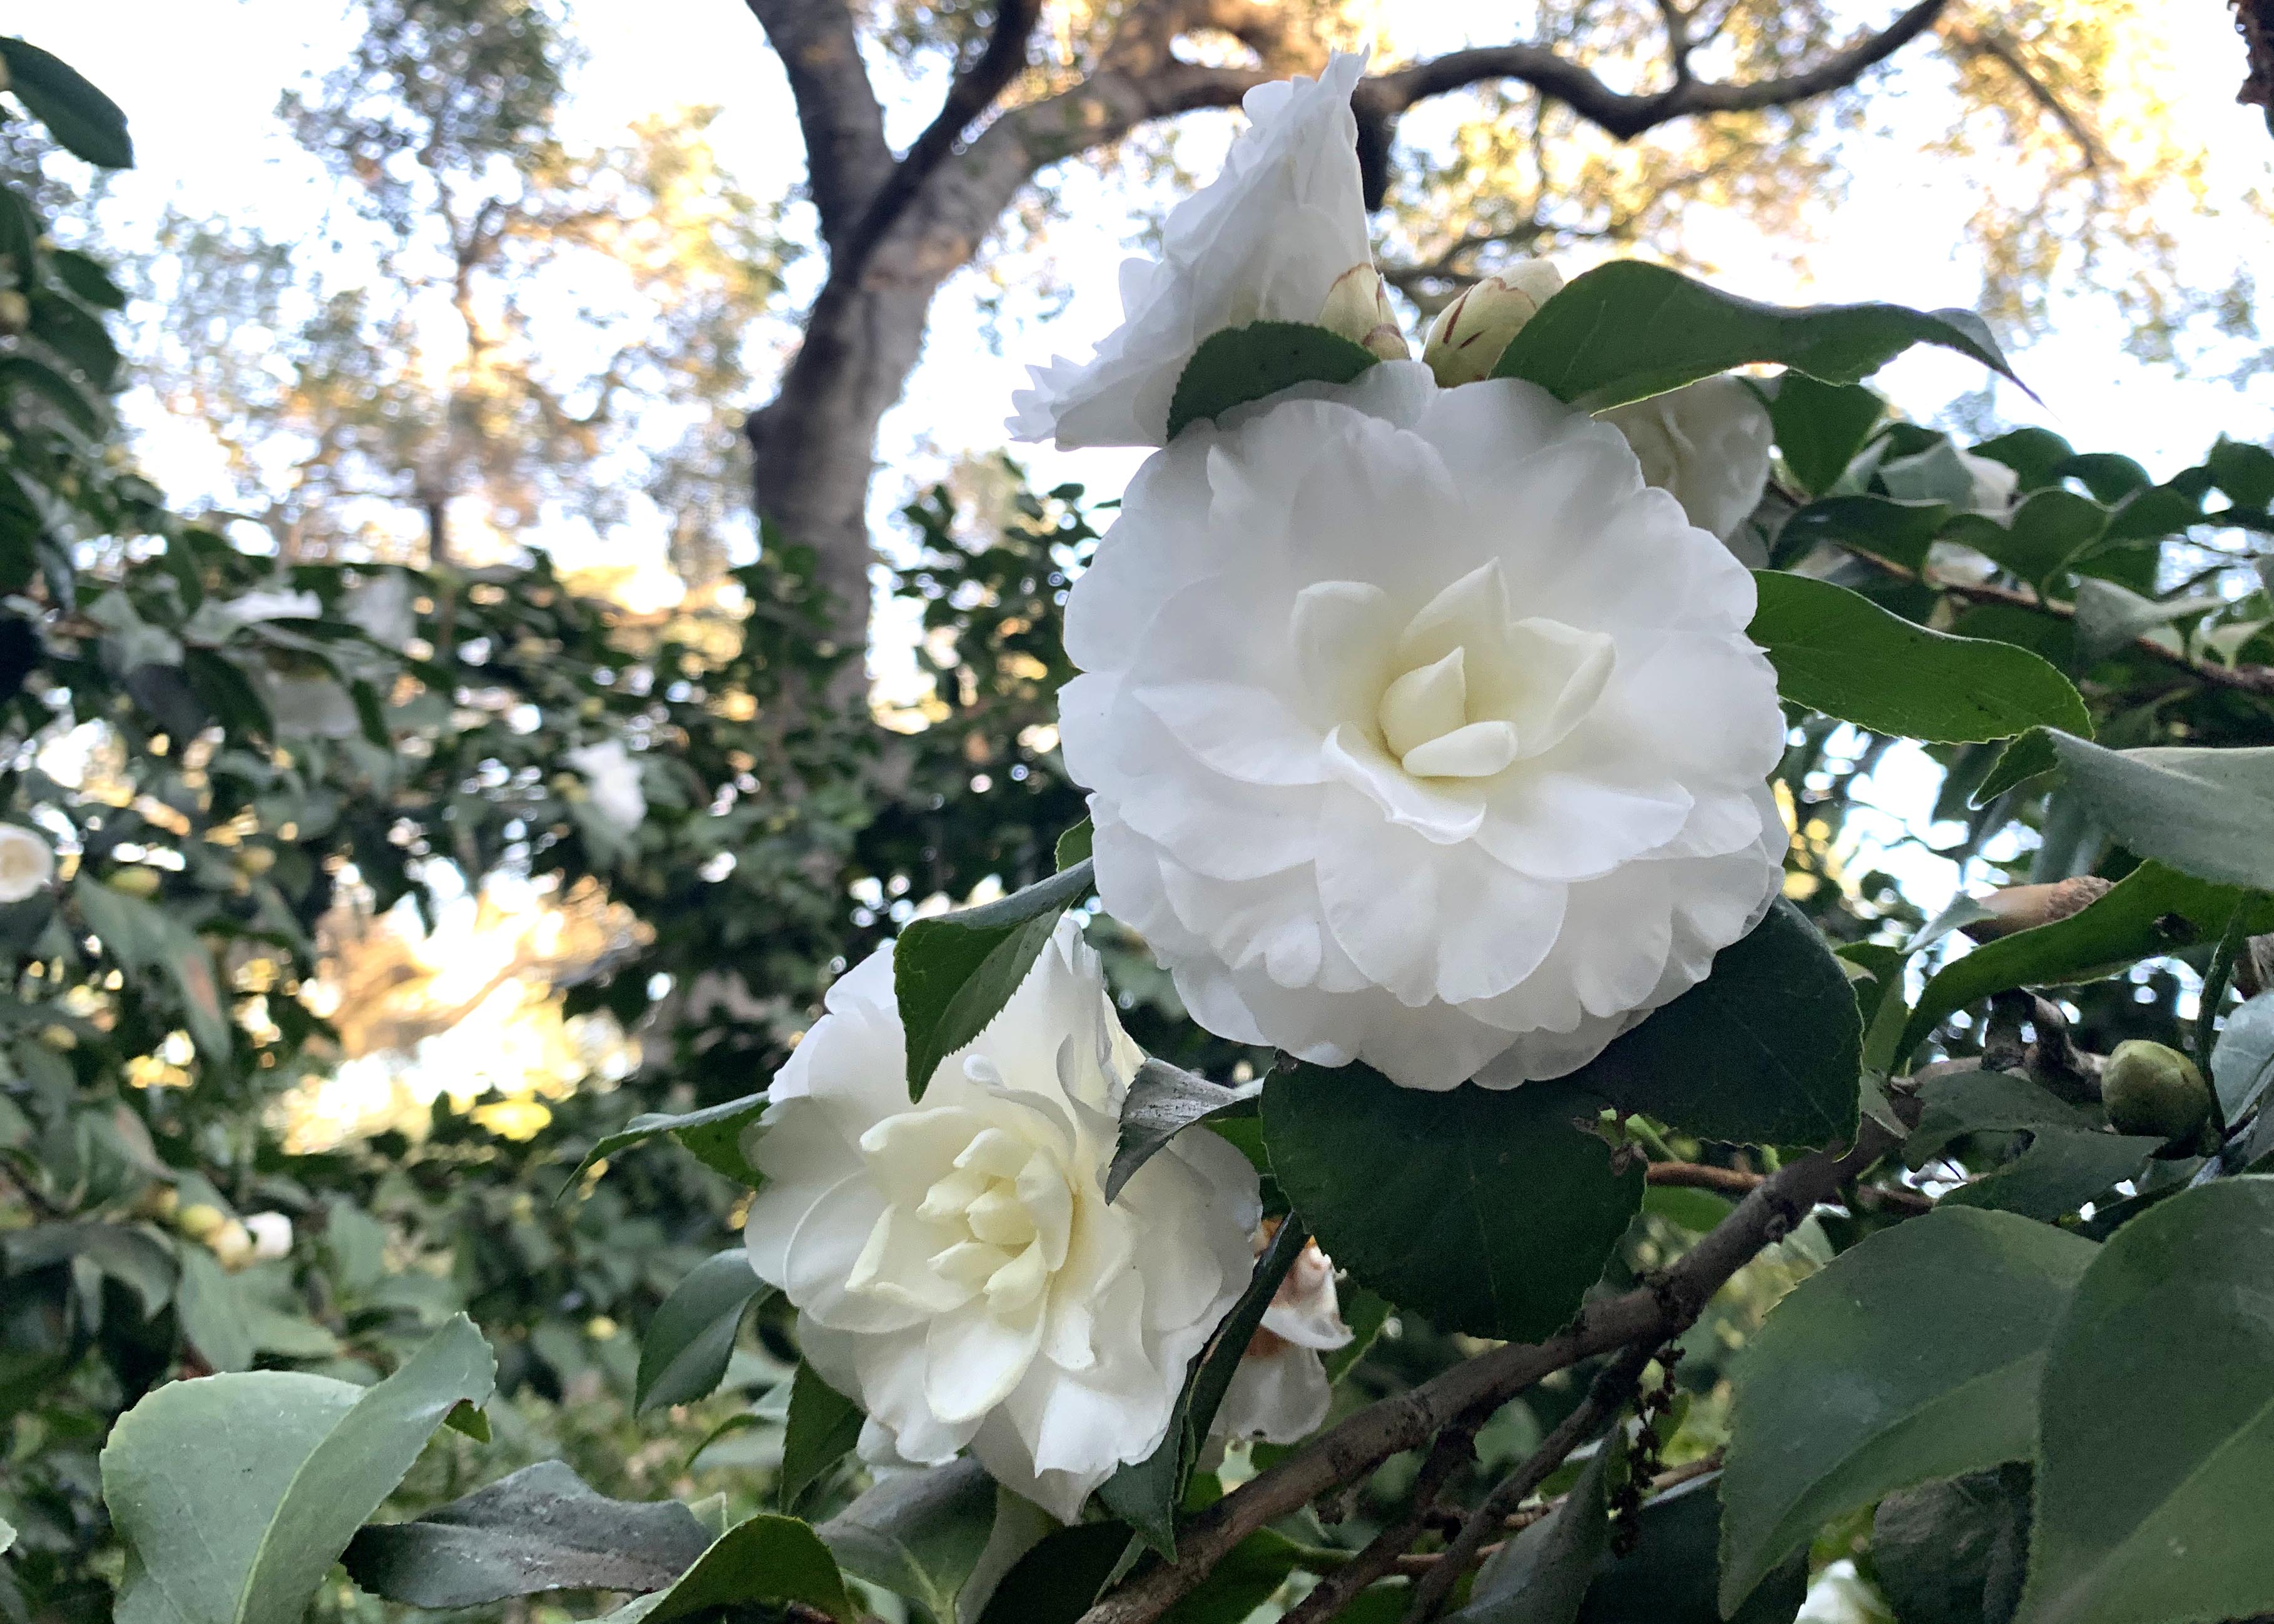 Descanso Gardens - The #Chanel camellia is blooming 🌼 Synonymous with the  CHANEL brand, #Camellia japonica #AlbaPlena was said to be Coco Chanel's  favorite #flower. Loved for its minimalist, stately beauty, you